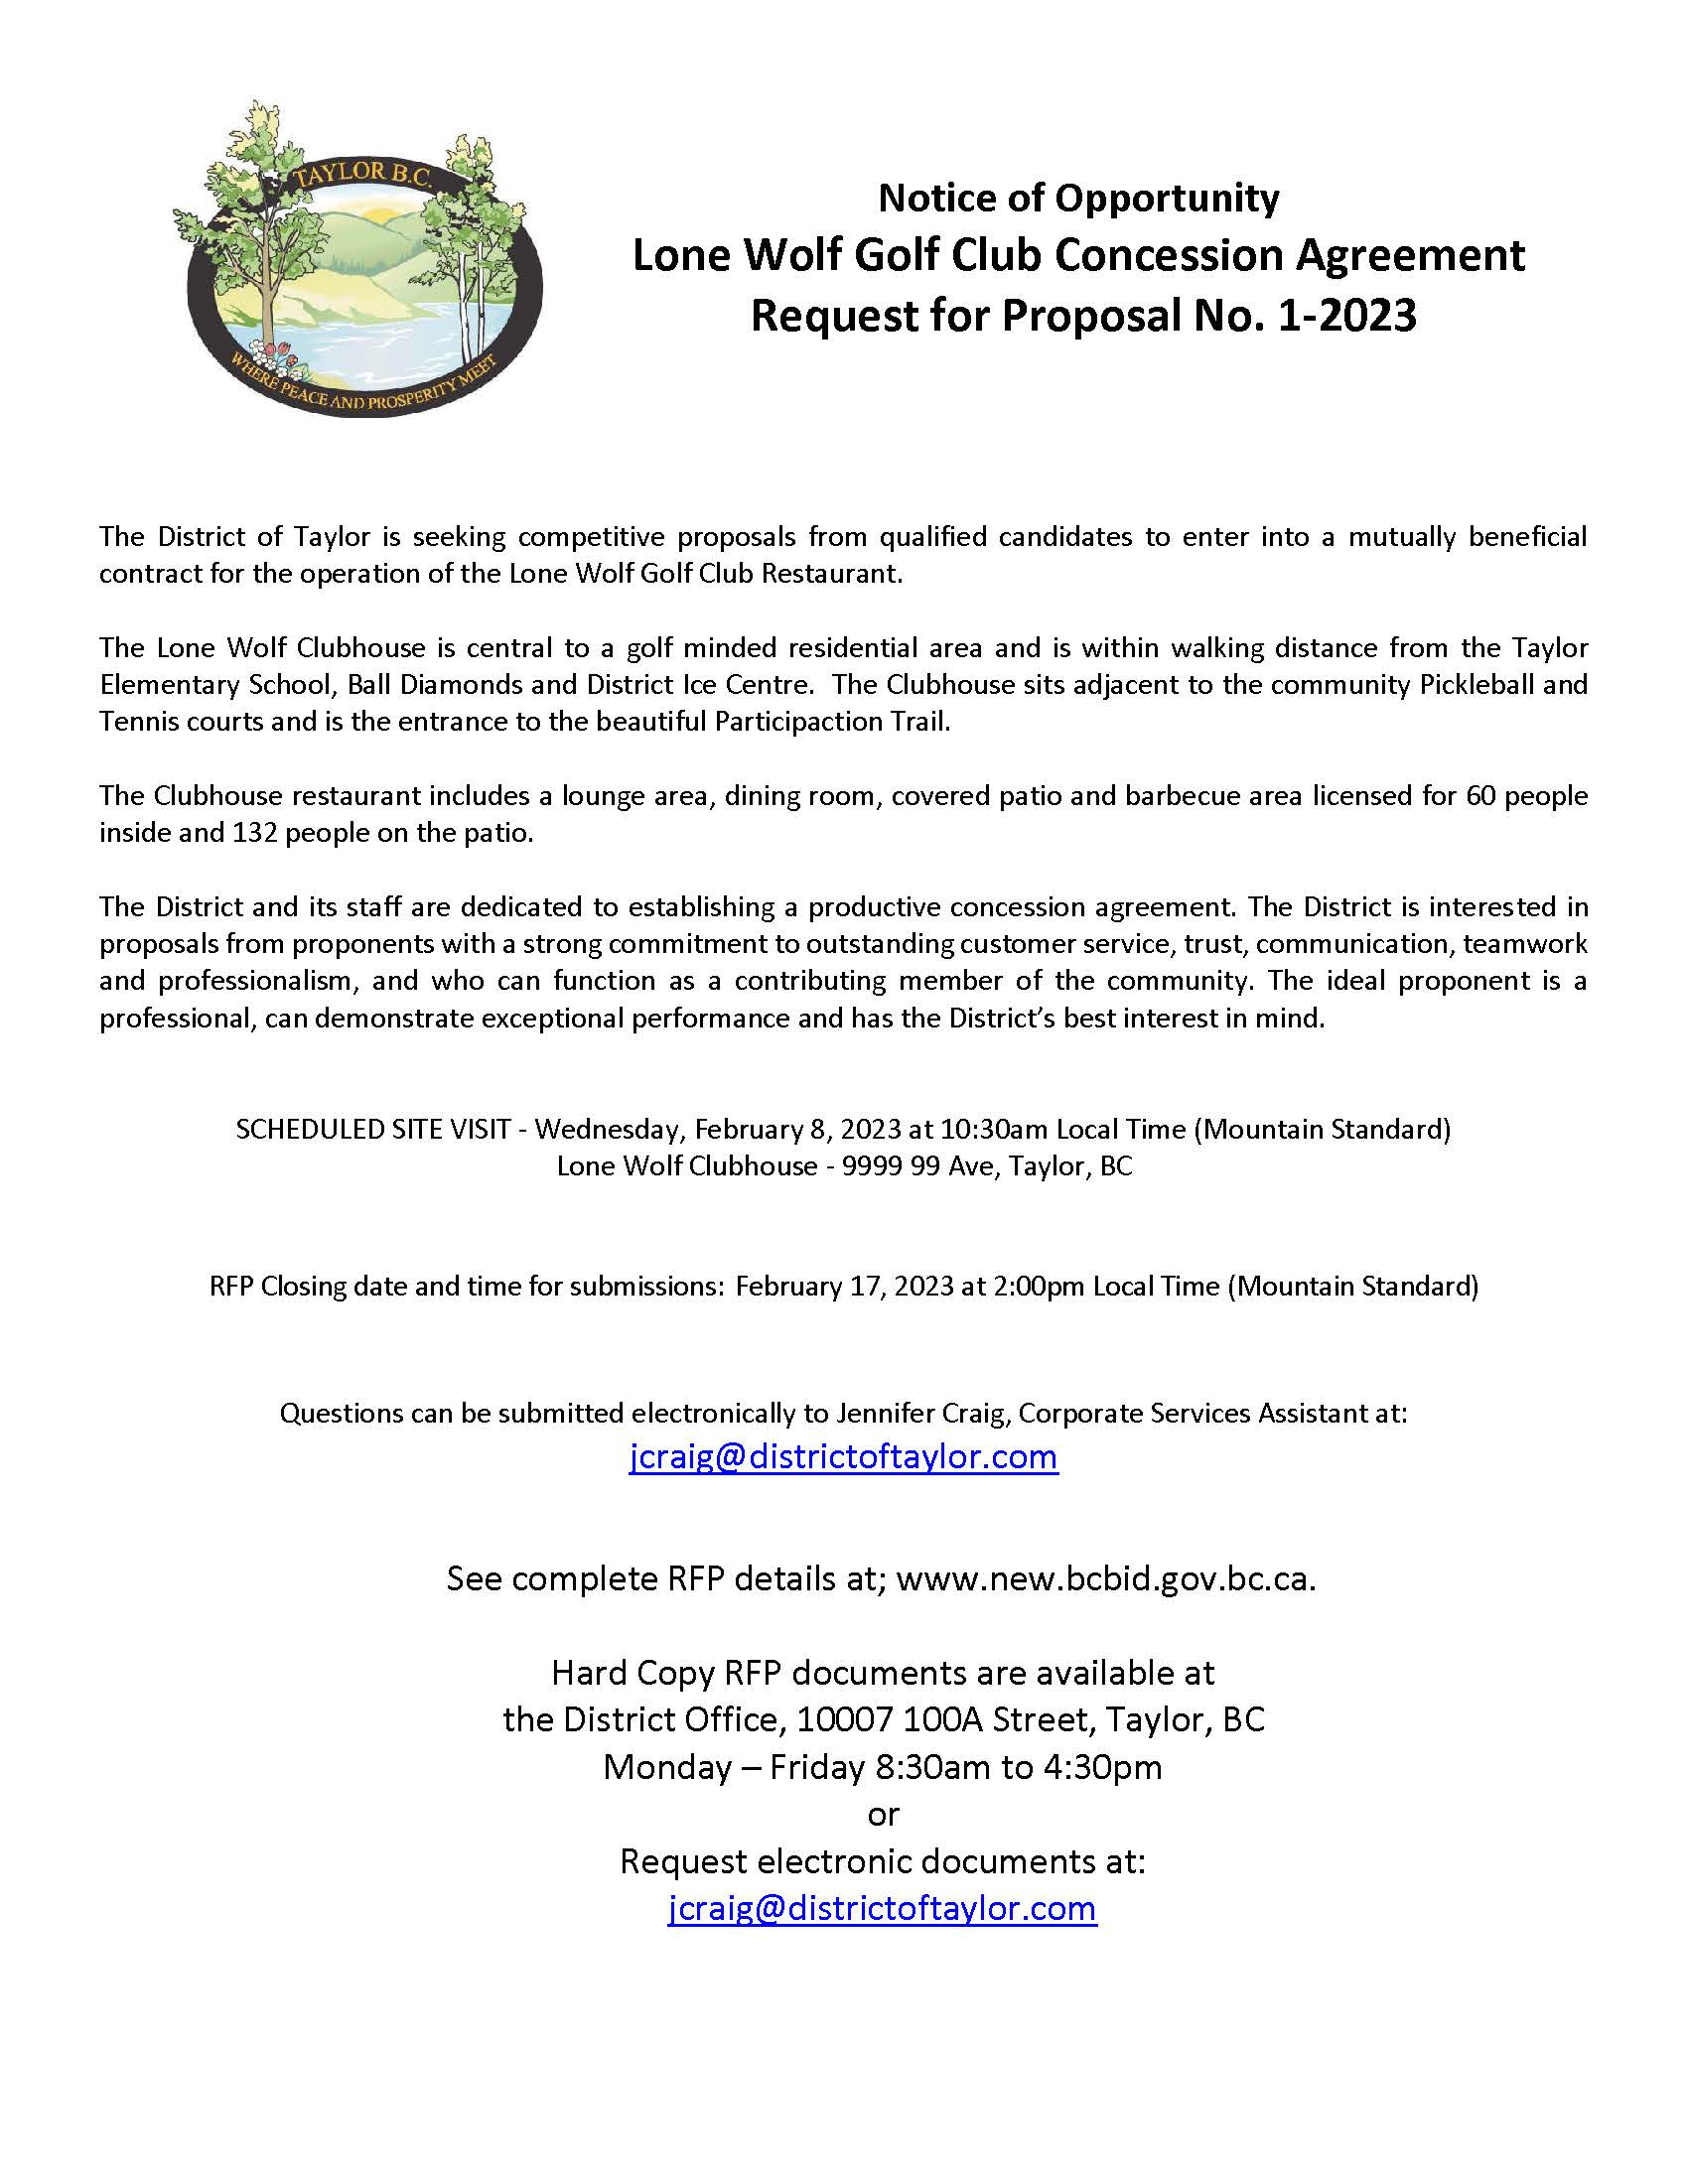 Notice of Opportunity Lone Wolf Golf Club Concession Agreement Request for Proposal No. 1-2023